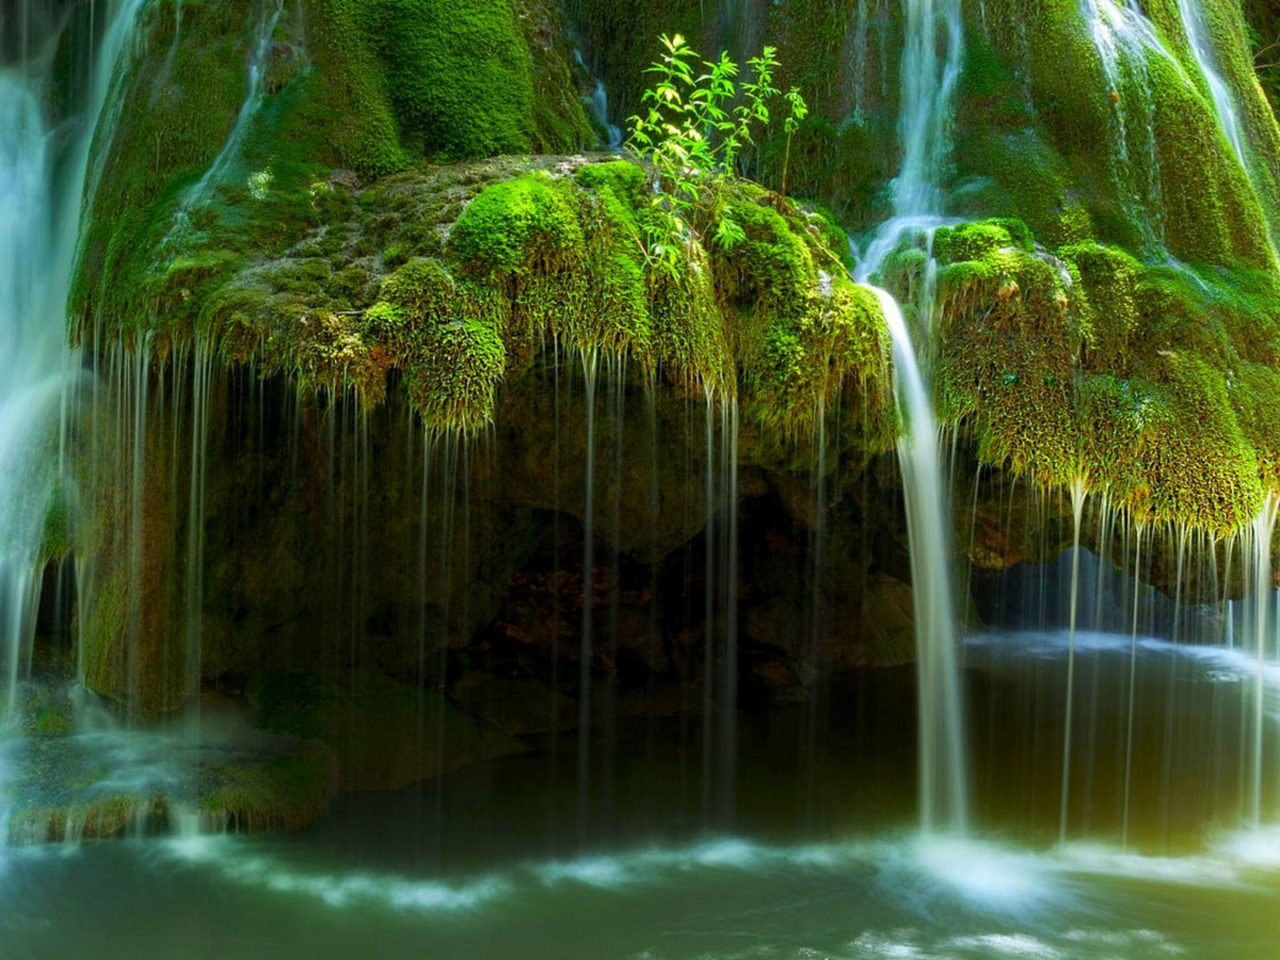 Waterfall In Romania River Rock With Green Moss Flowing Water Lake Nature Landscape Wallpaper HD 1920x1080, Wallpaper13.com